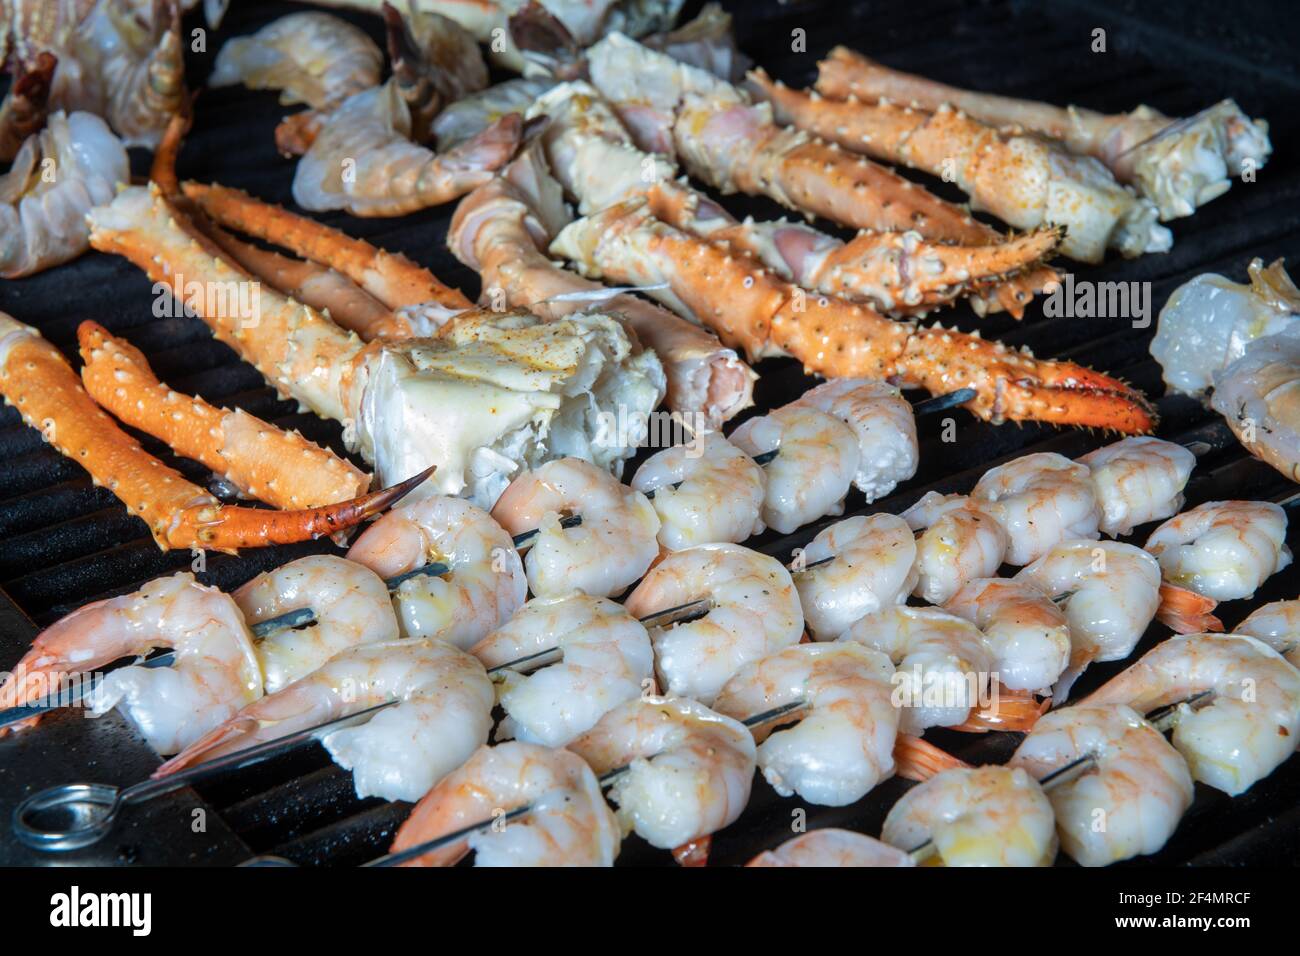 A collection of different kinds of seafood bbq cooking on a grill with shrimp on skewers, and Alaskan king crab Stock Photo